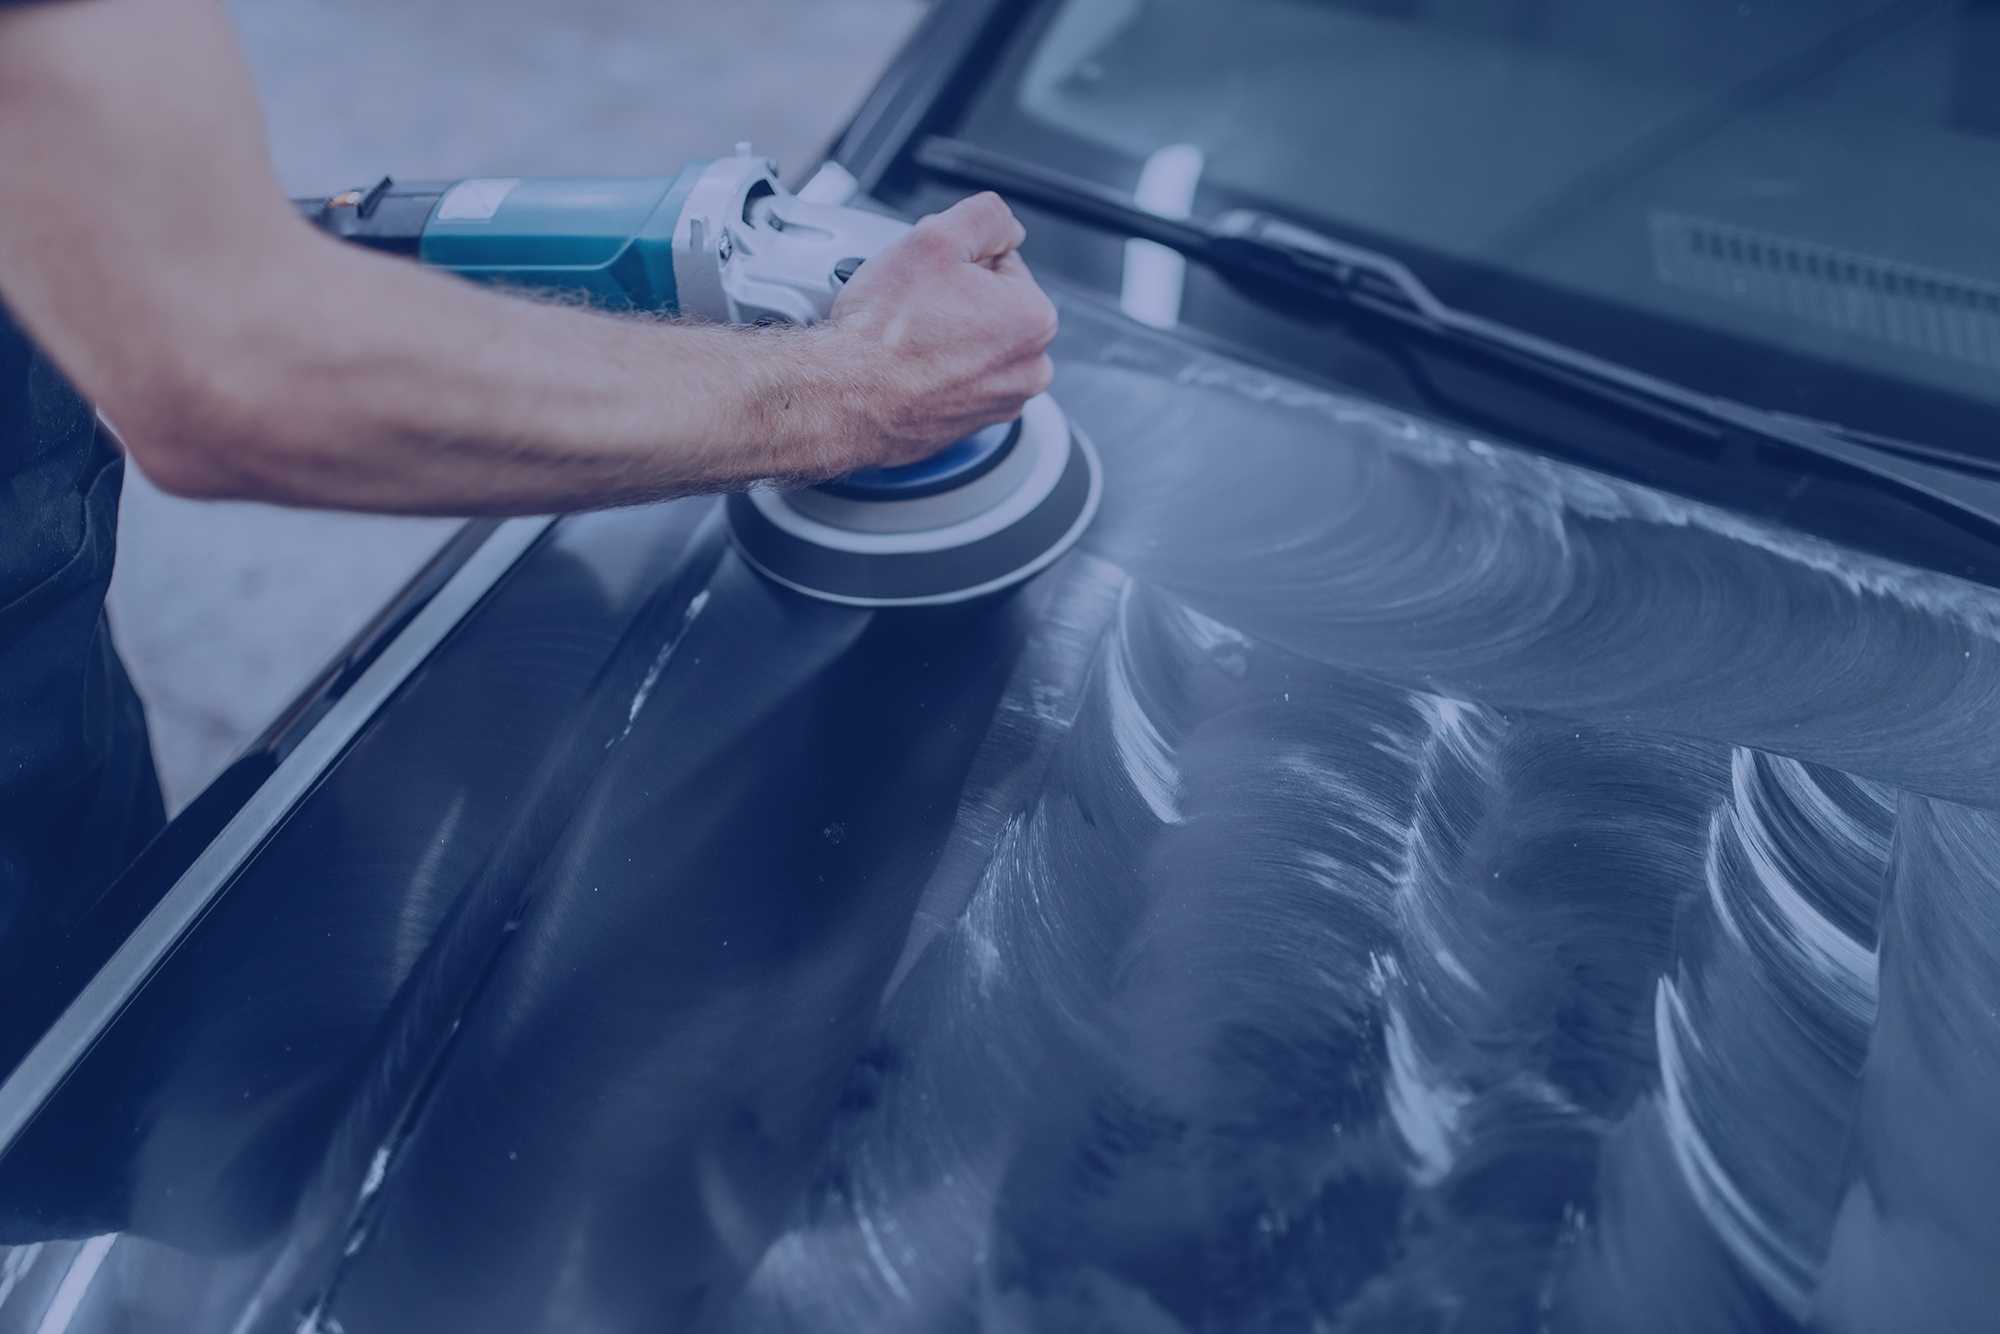 Male person with polishing machine cleans car hood